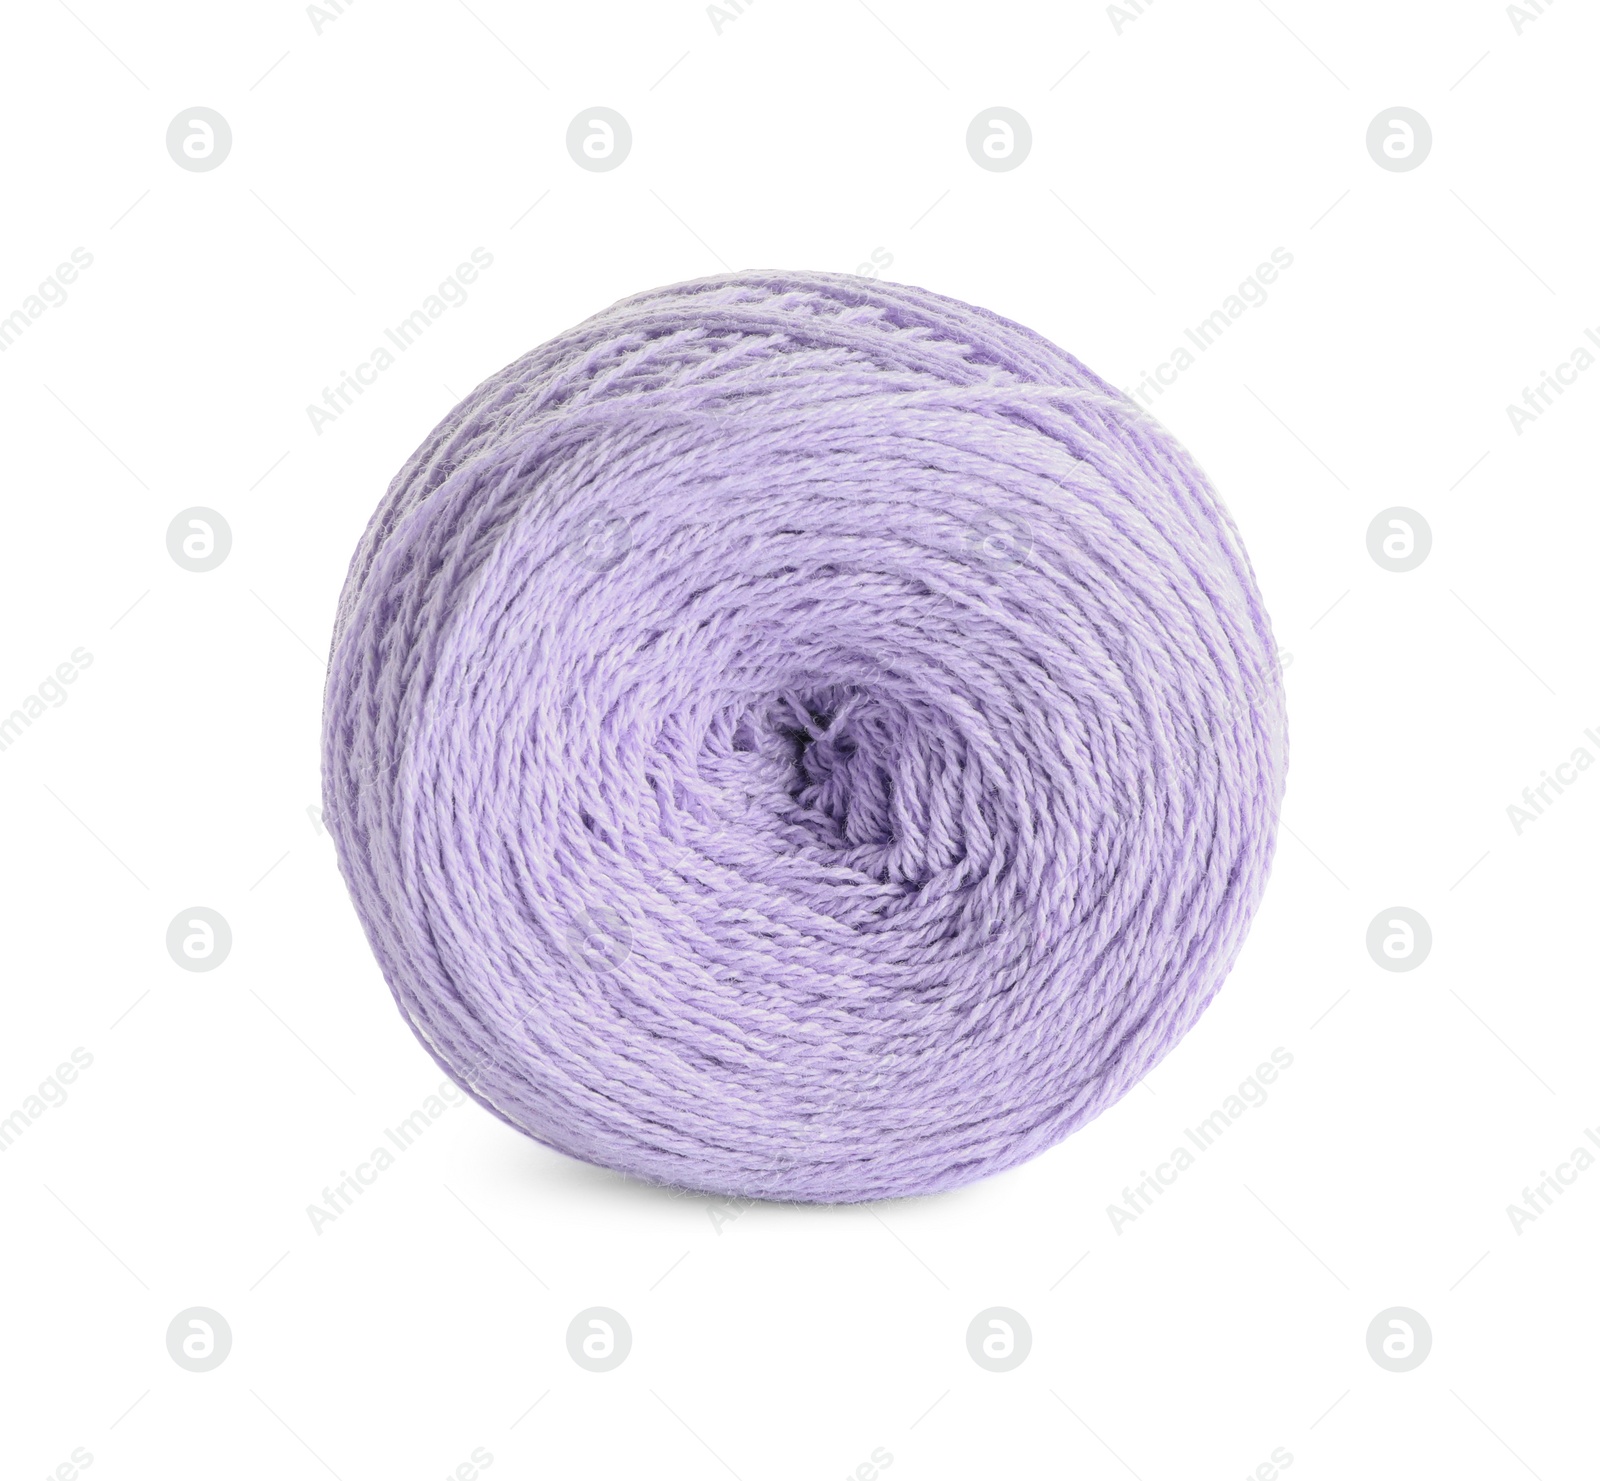 Photo of Soft violet woolen yarn isolated on white